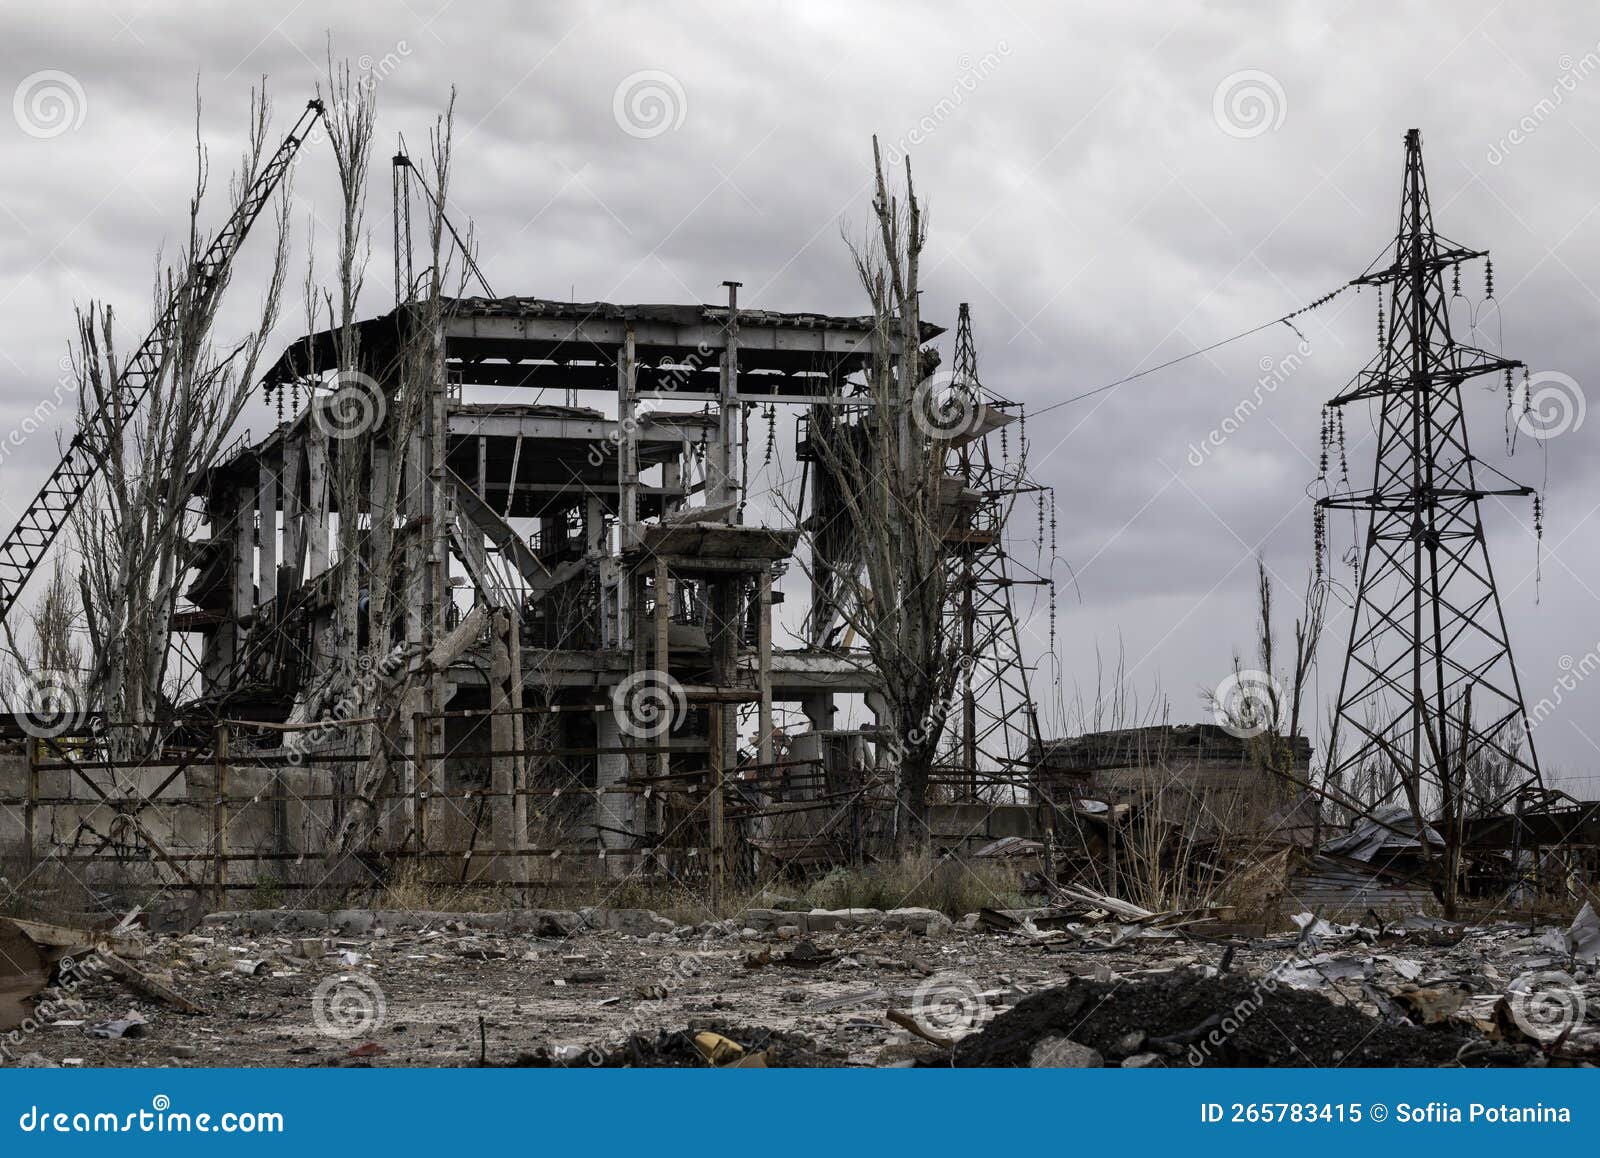 destroyed buildings of the workshop of the azovstal plant in mariupol ukraine